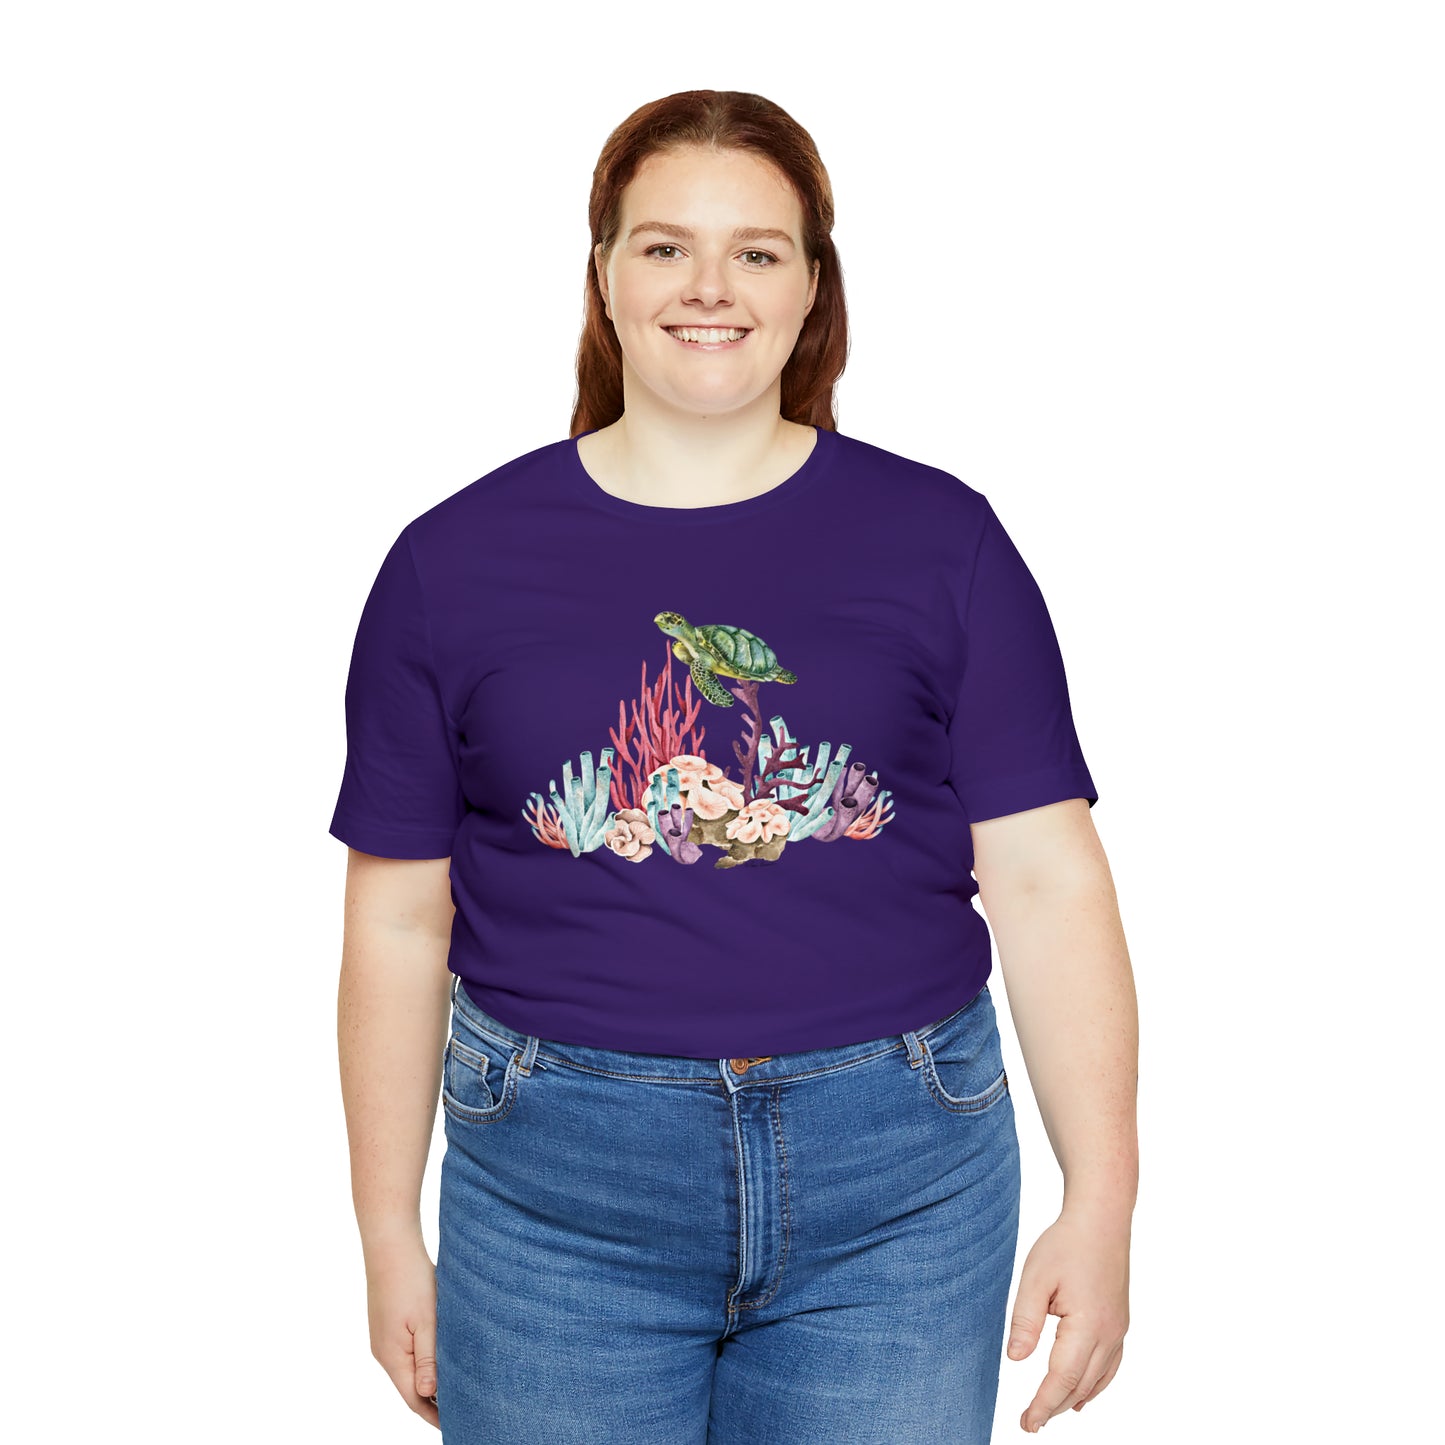 Mock up of a plus-size woman wearing the purple shirt